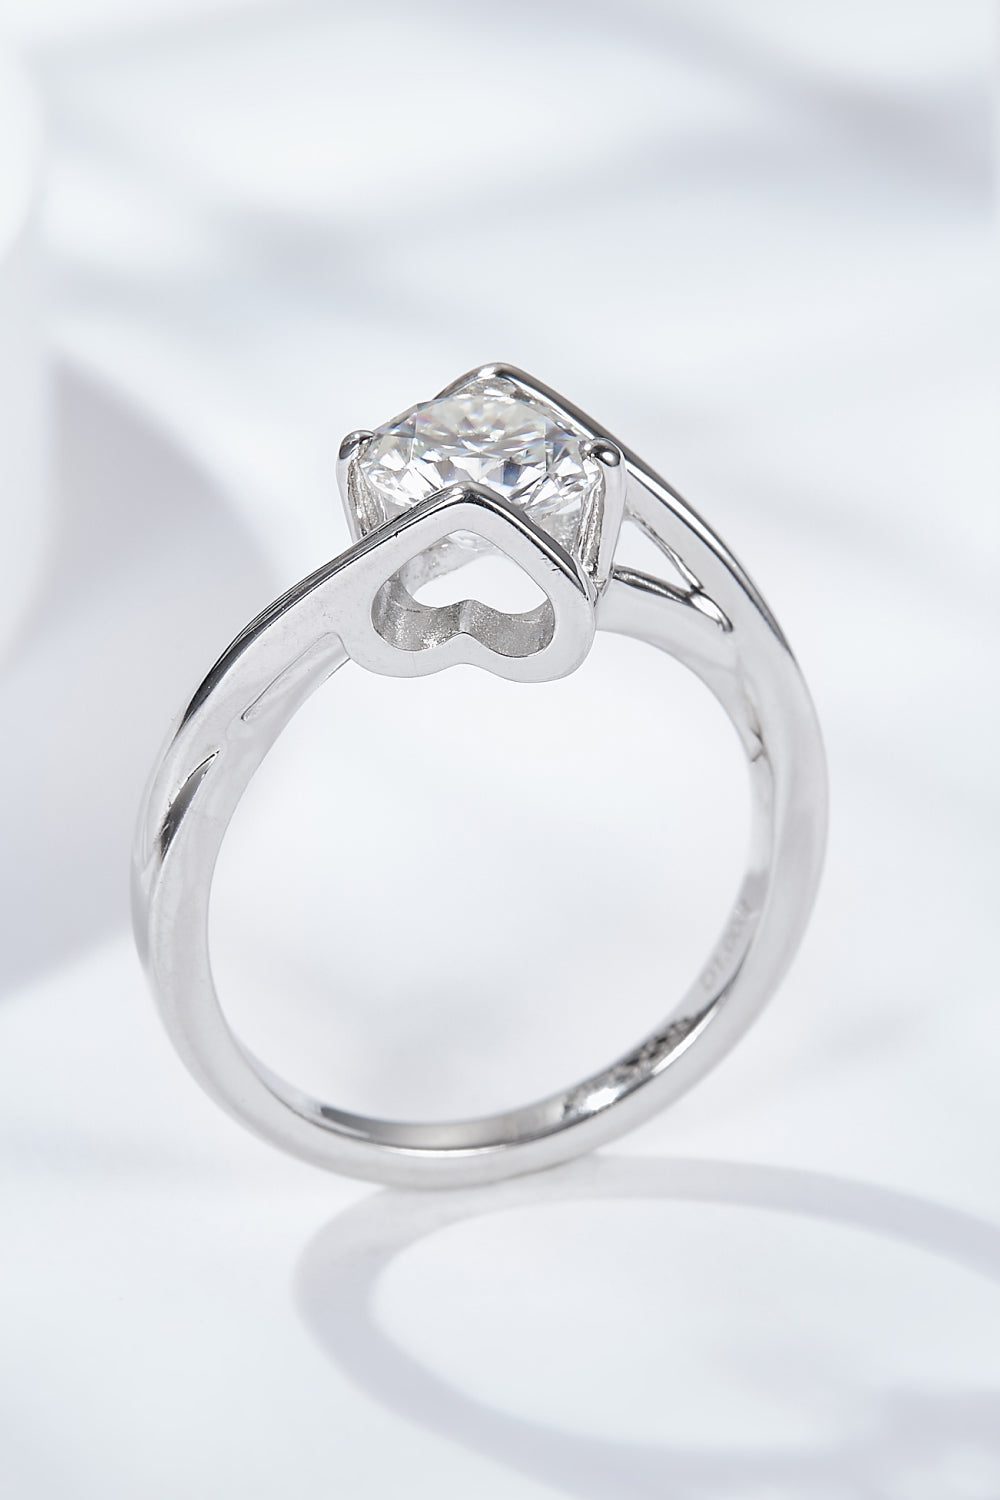 Get What You Need 1 Carat Moissanite Ring-Rings-Inspired by Justeen-Women's Clothing Boutique in Chicago, Illinois